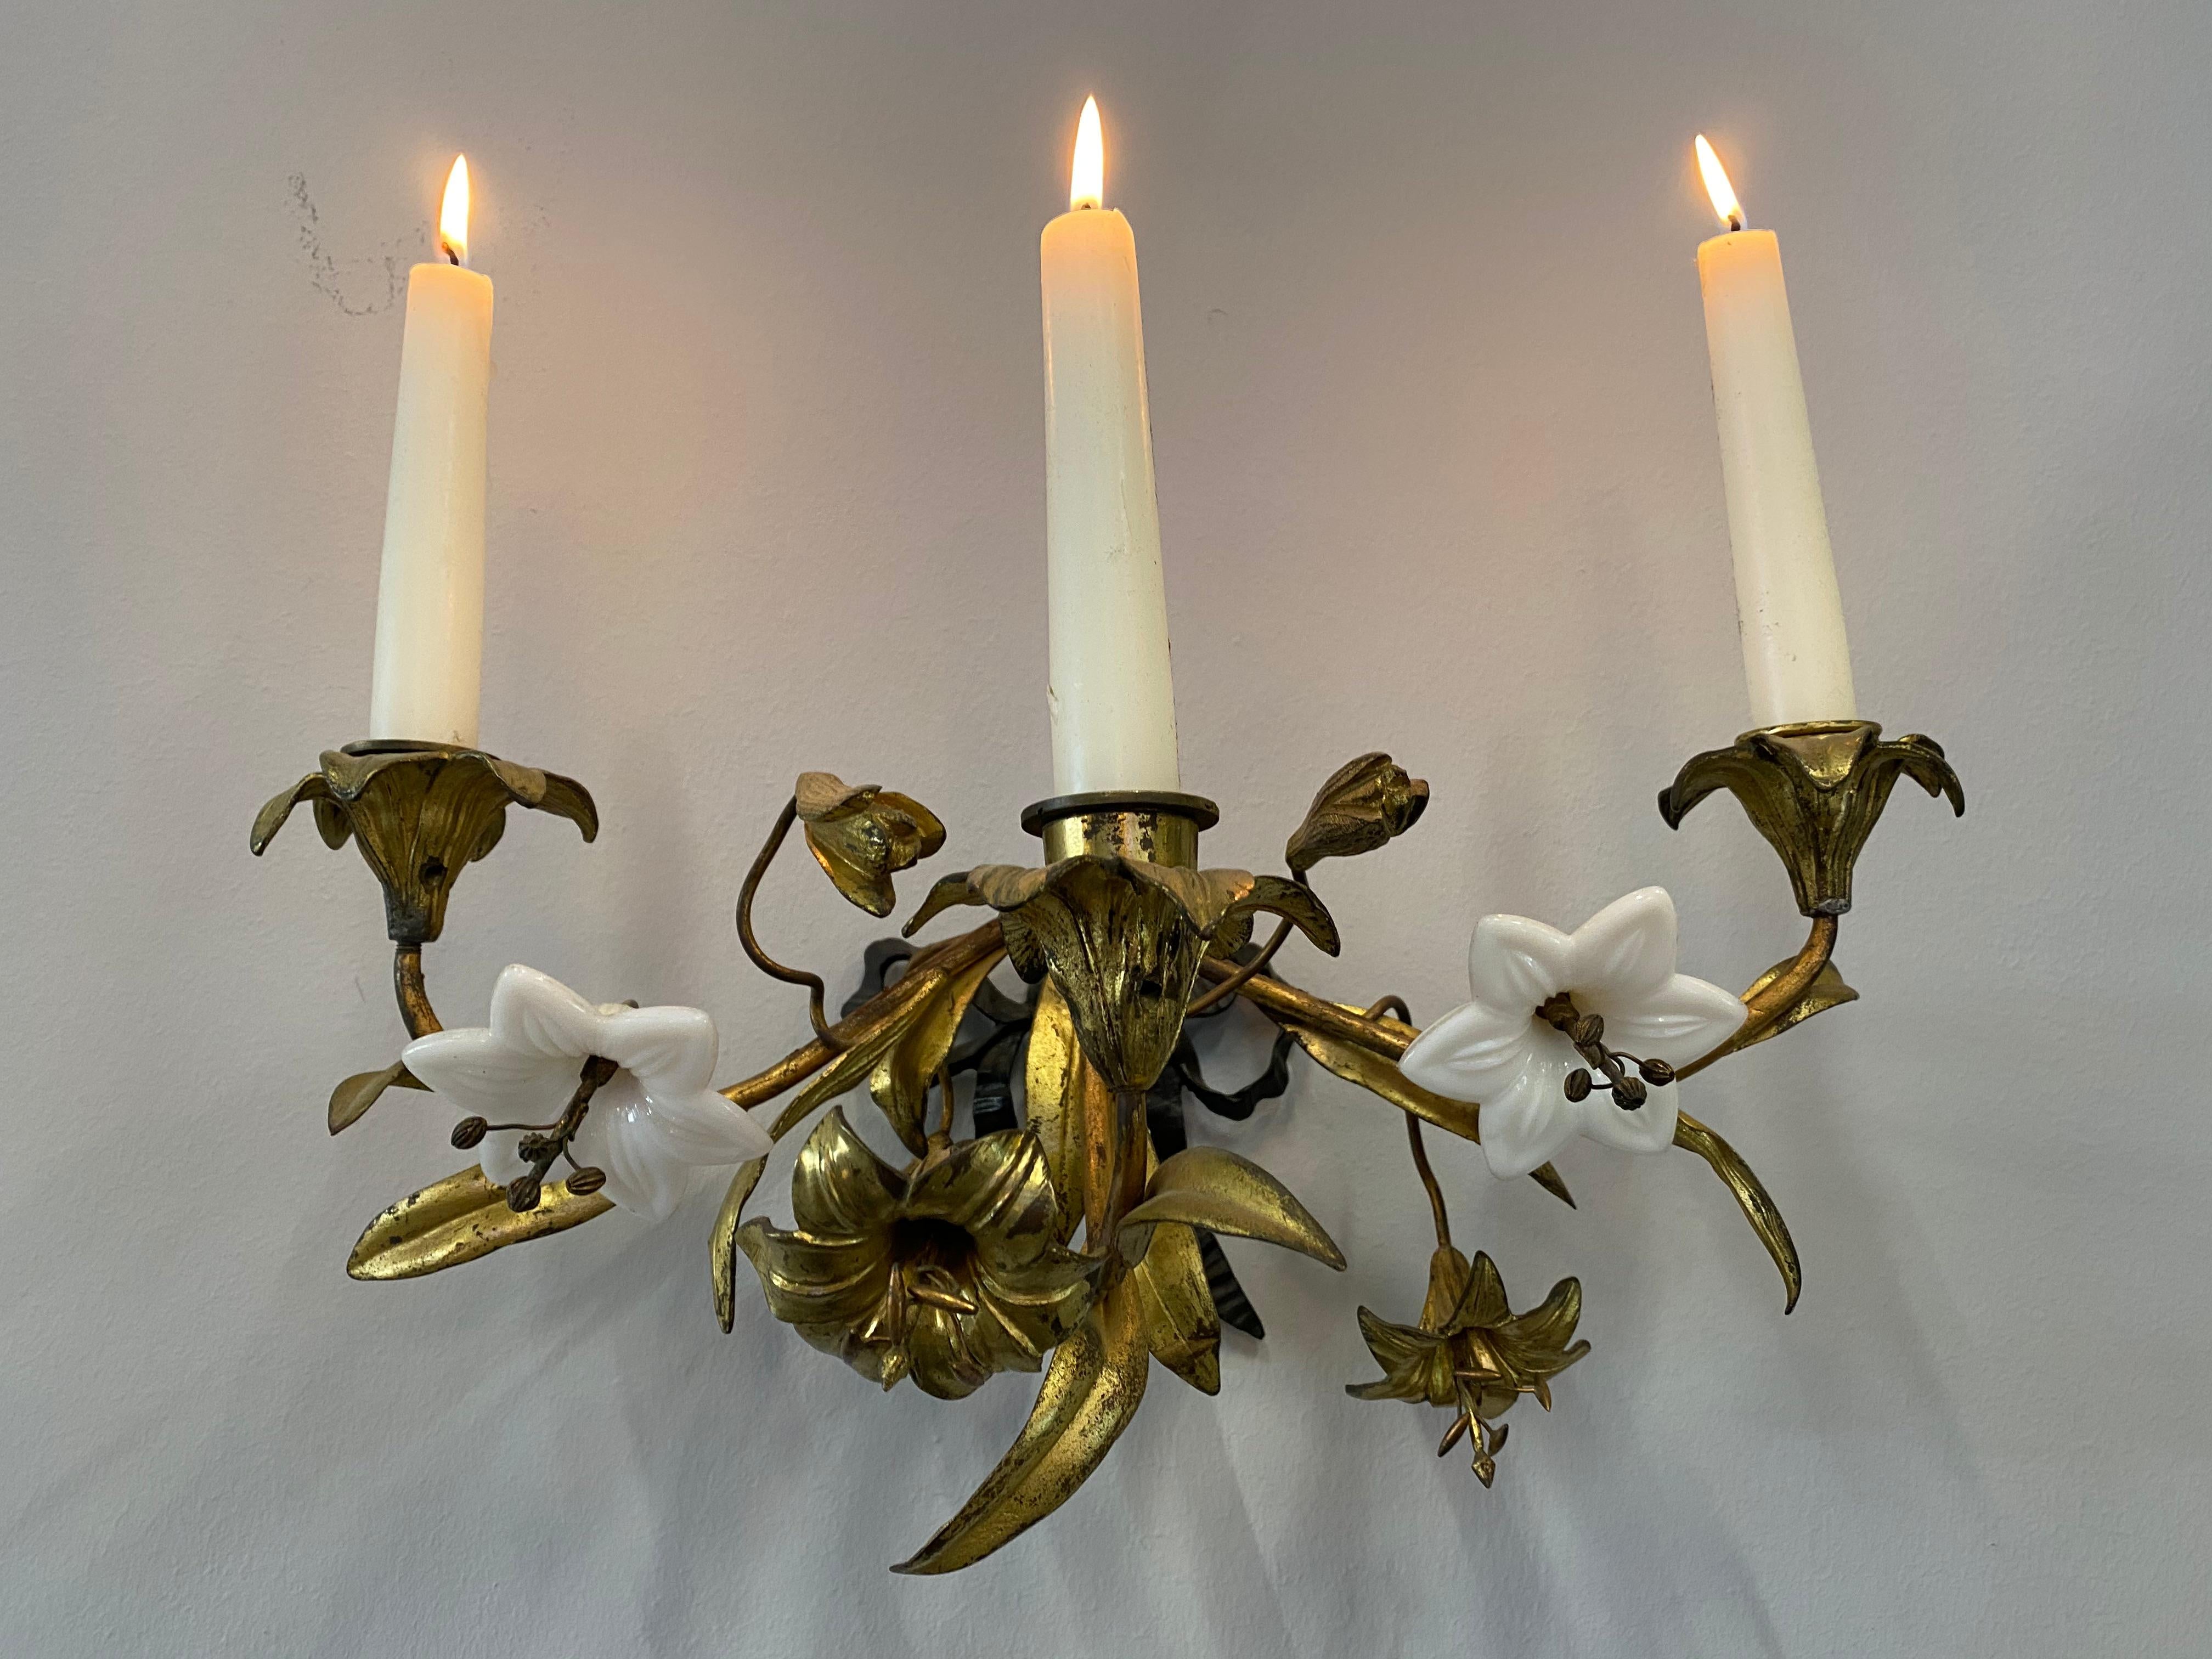 This playful Art Nouveau wall candleholder is a unique wall decoration. The candleholder has three arms which are surrounded by gilded metal and glass flowers and leaves. The holder on the wall forms a loop. Equipped with 3 candles the candleholder